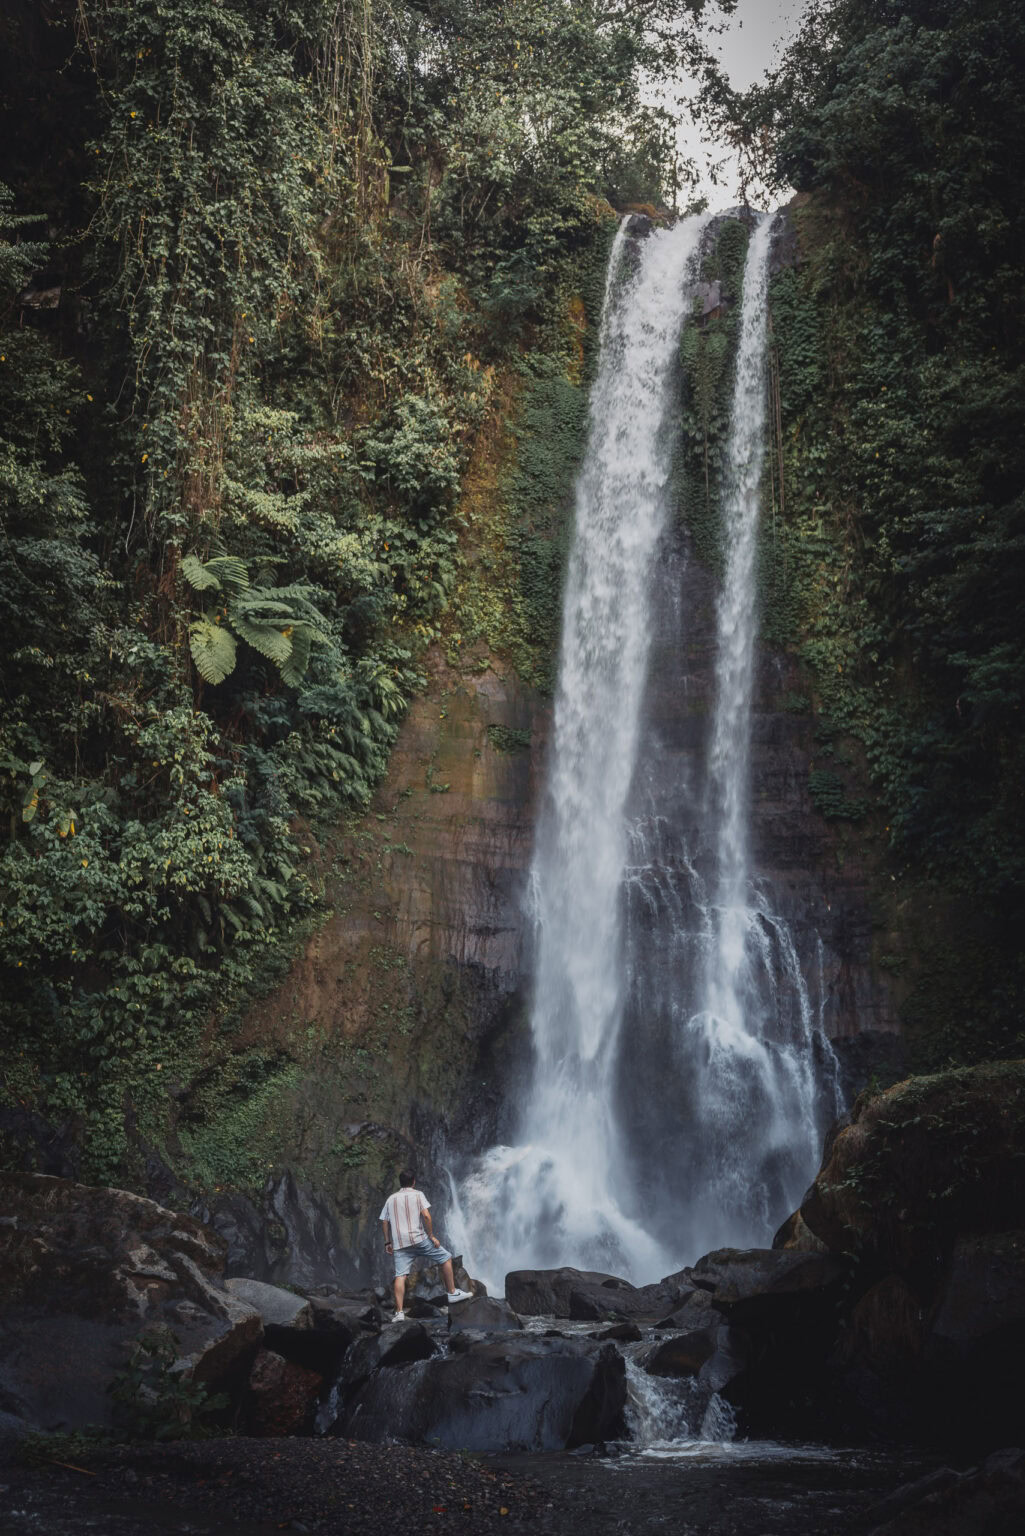 Standing in front of the Gitgit Waterfall